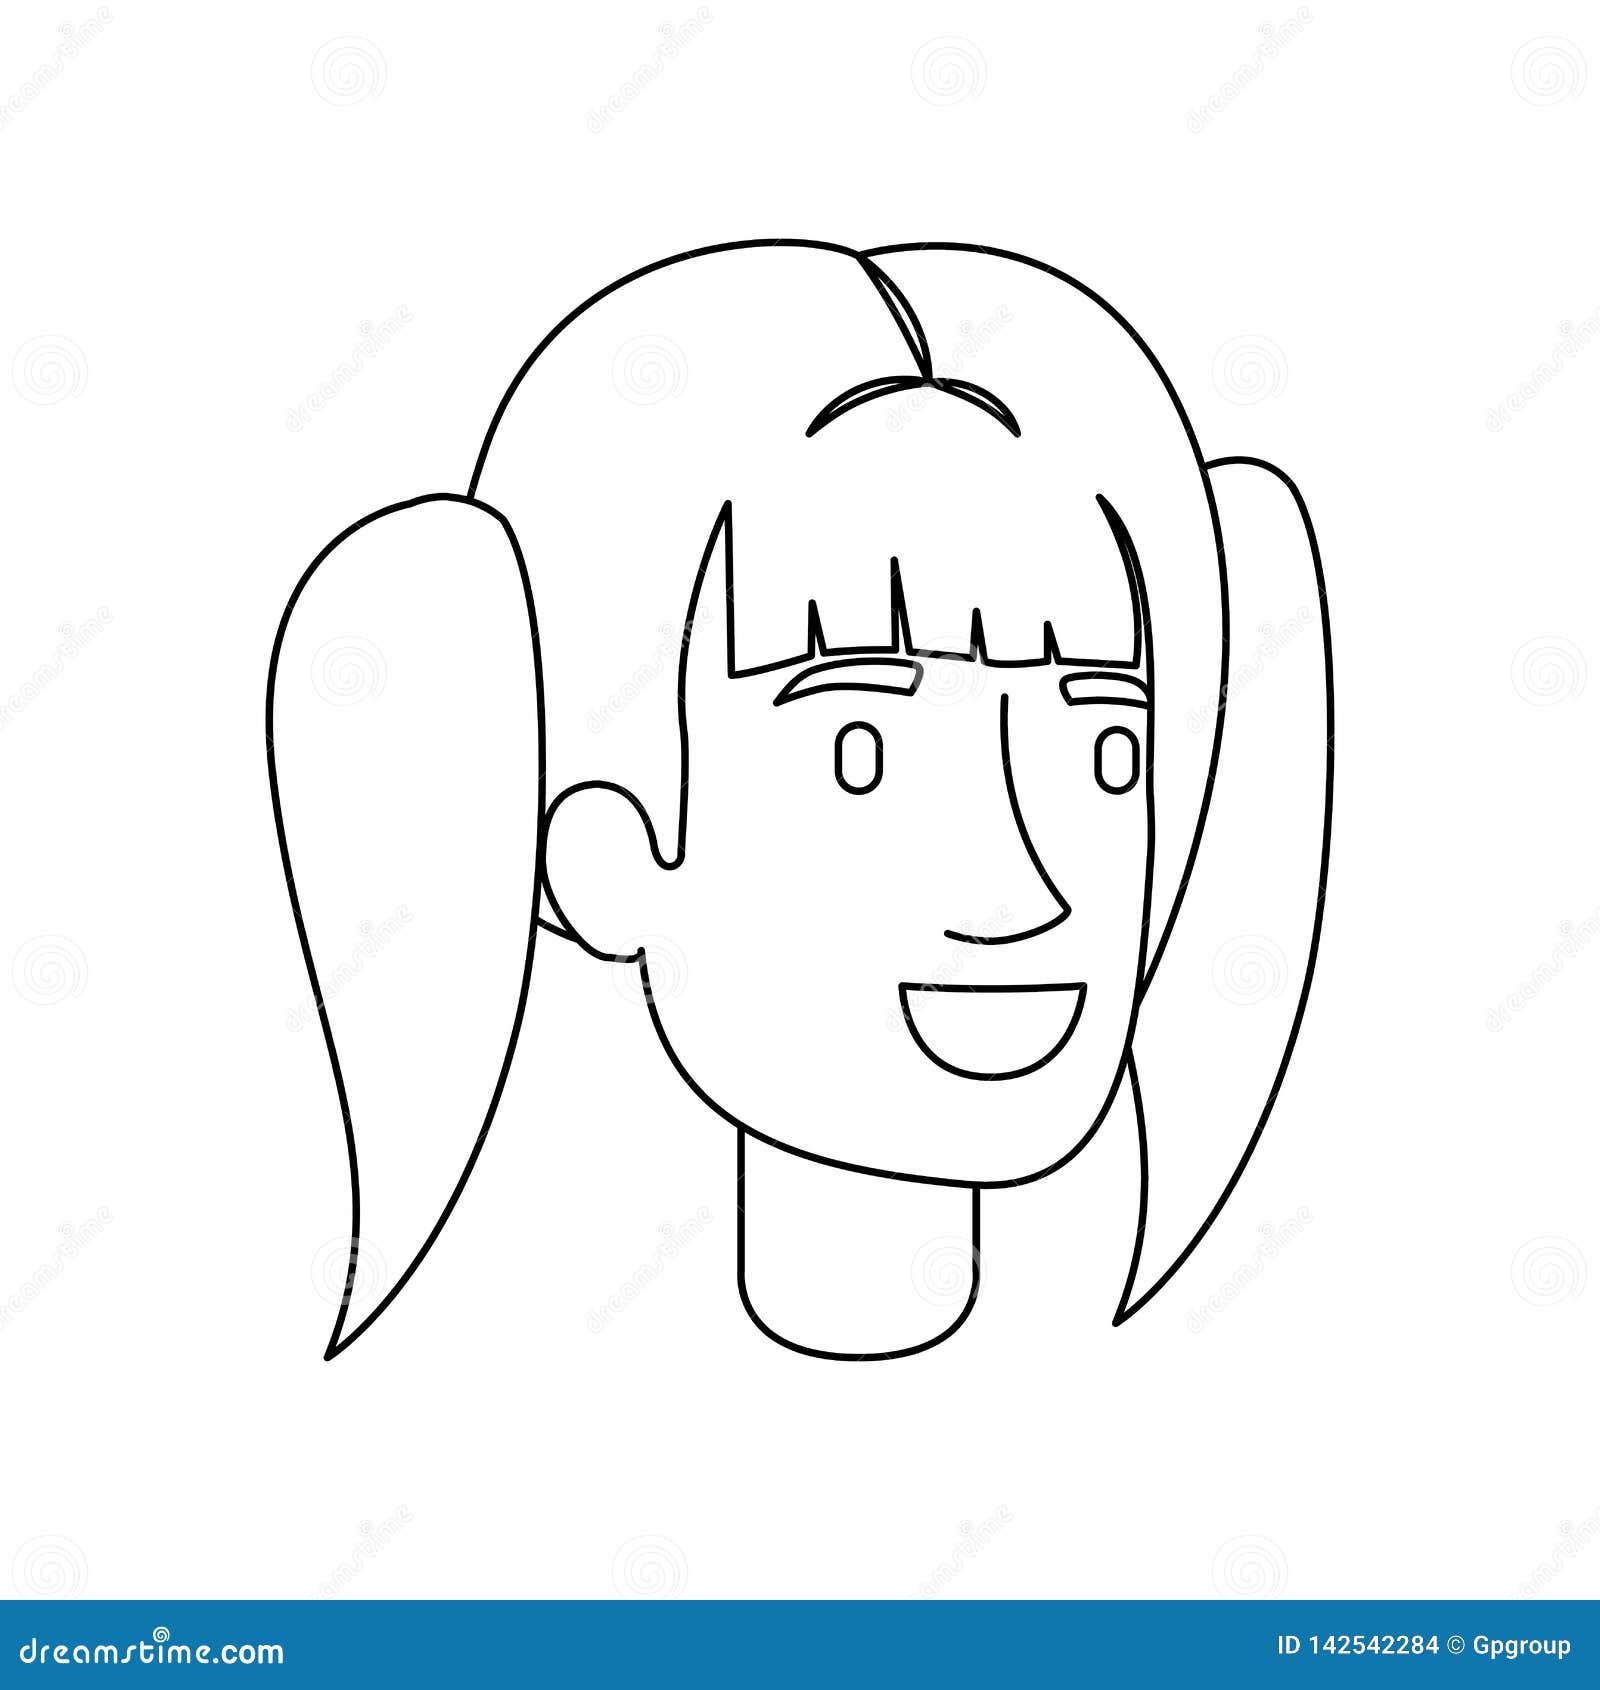 Monochrome Silhouette of Woman Face with Pigtails Hairstyle Stock ...